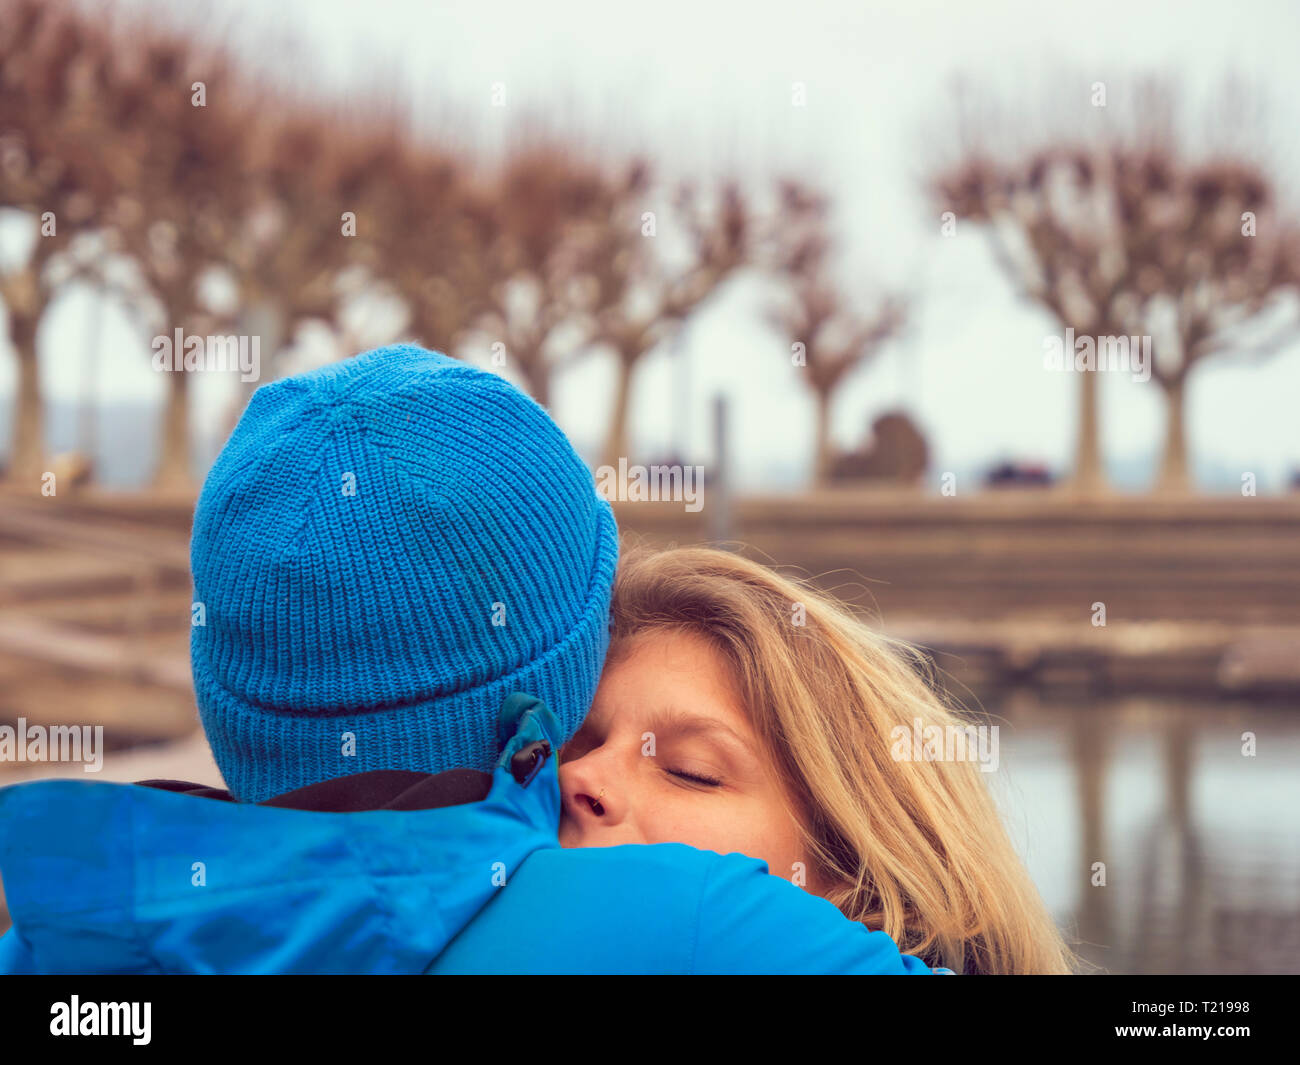 Man with blue woll cap embracing blond woman Stock Photo